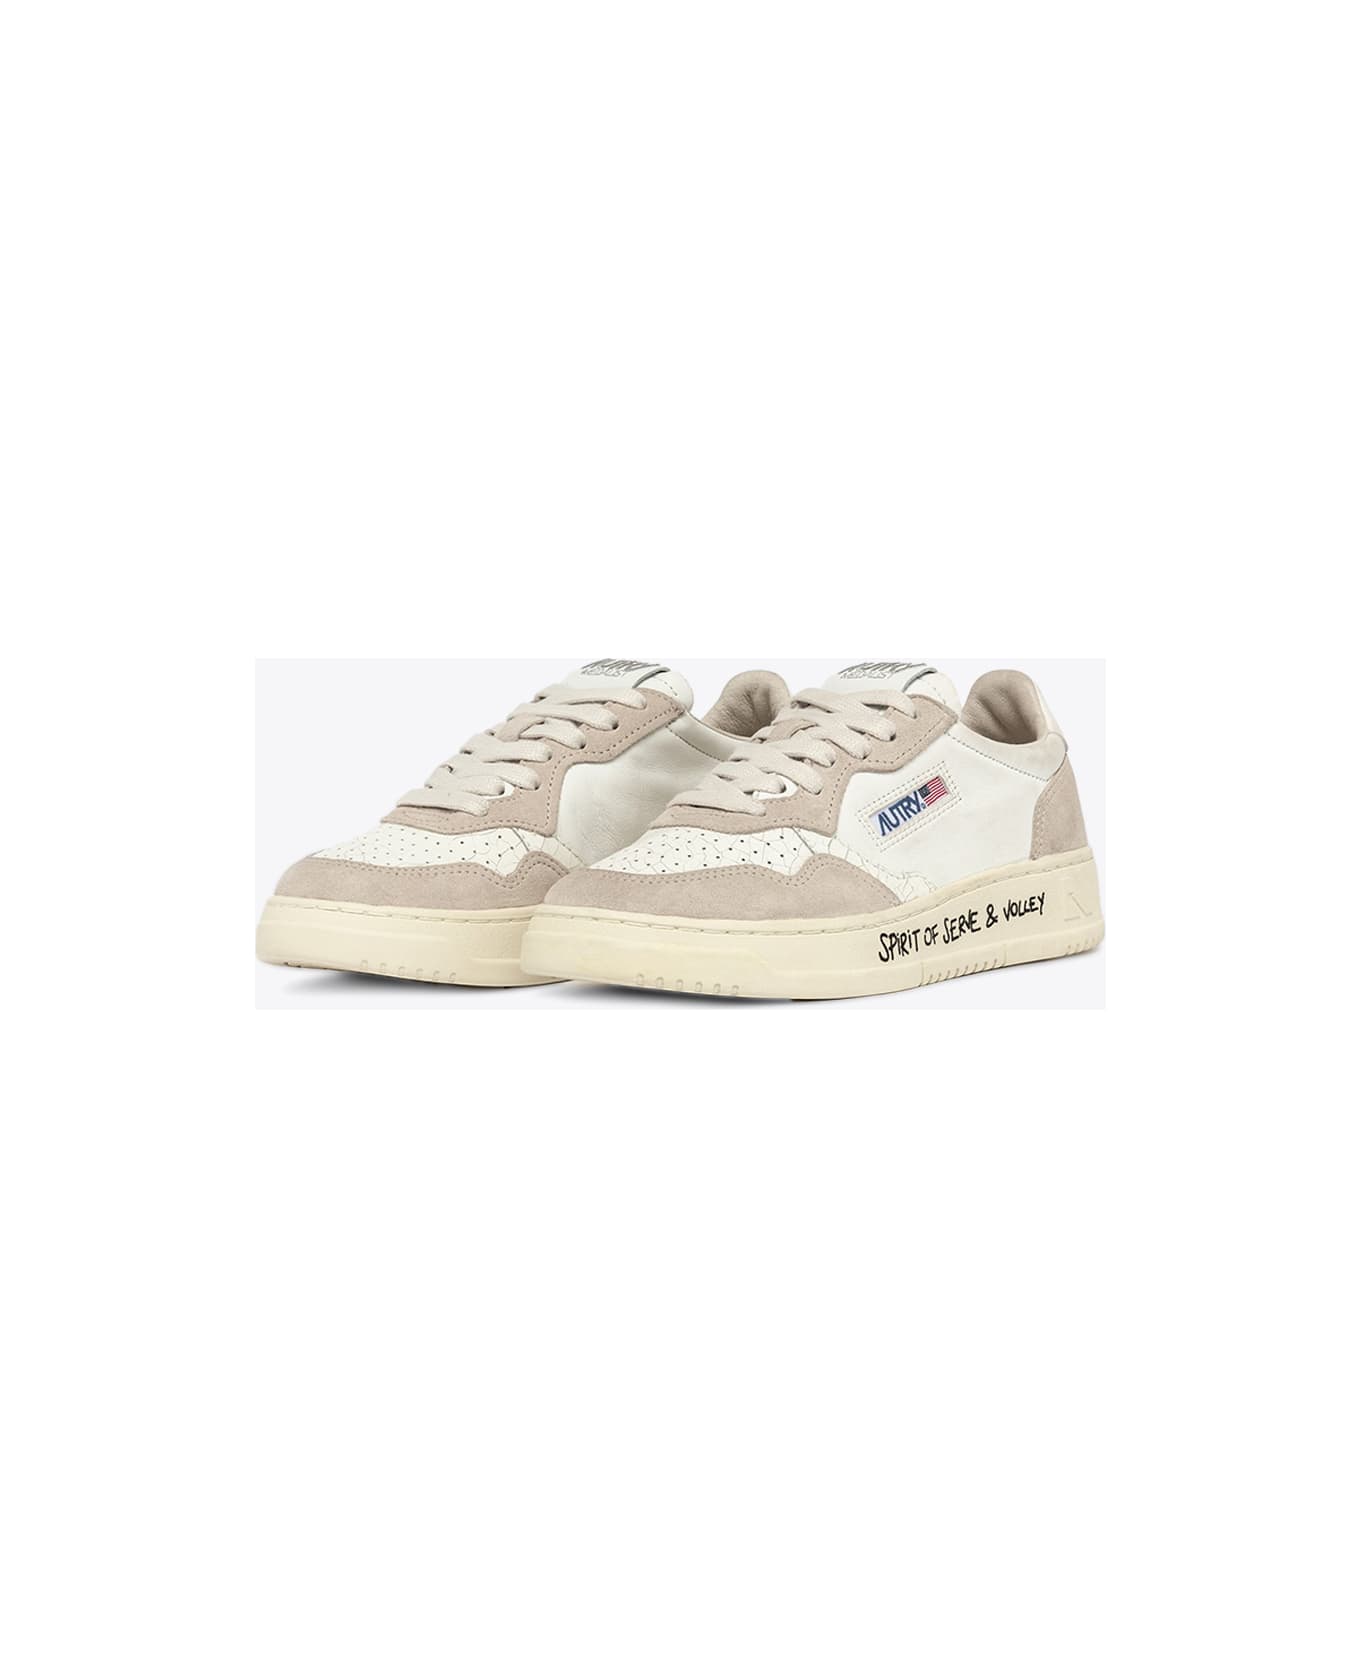 Autry Medalist Low Wom - Wrt/volley Wht/sand White leather low sneaker with back logo tab - Medalist - Bianco/Sabbia